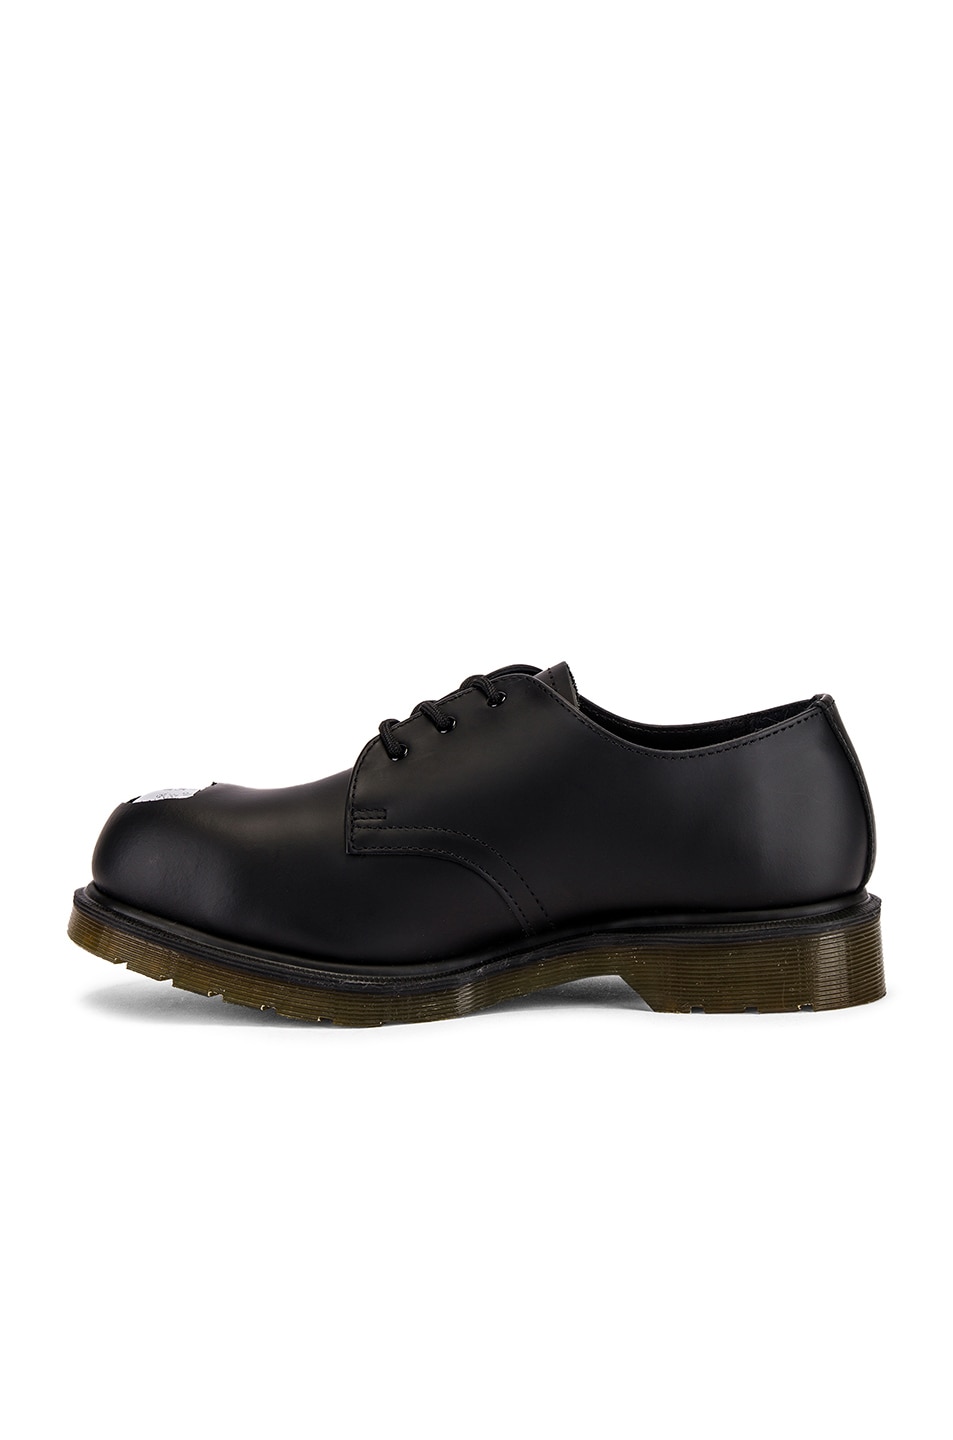 Raf Simons x Dr. Martens Cut Out Steel Toe Shoes in Black | FWRD